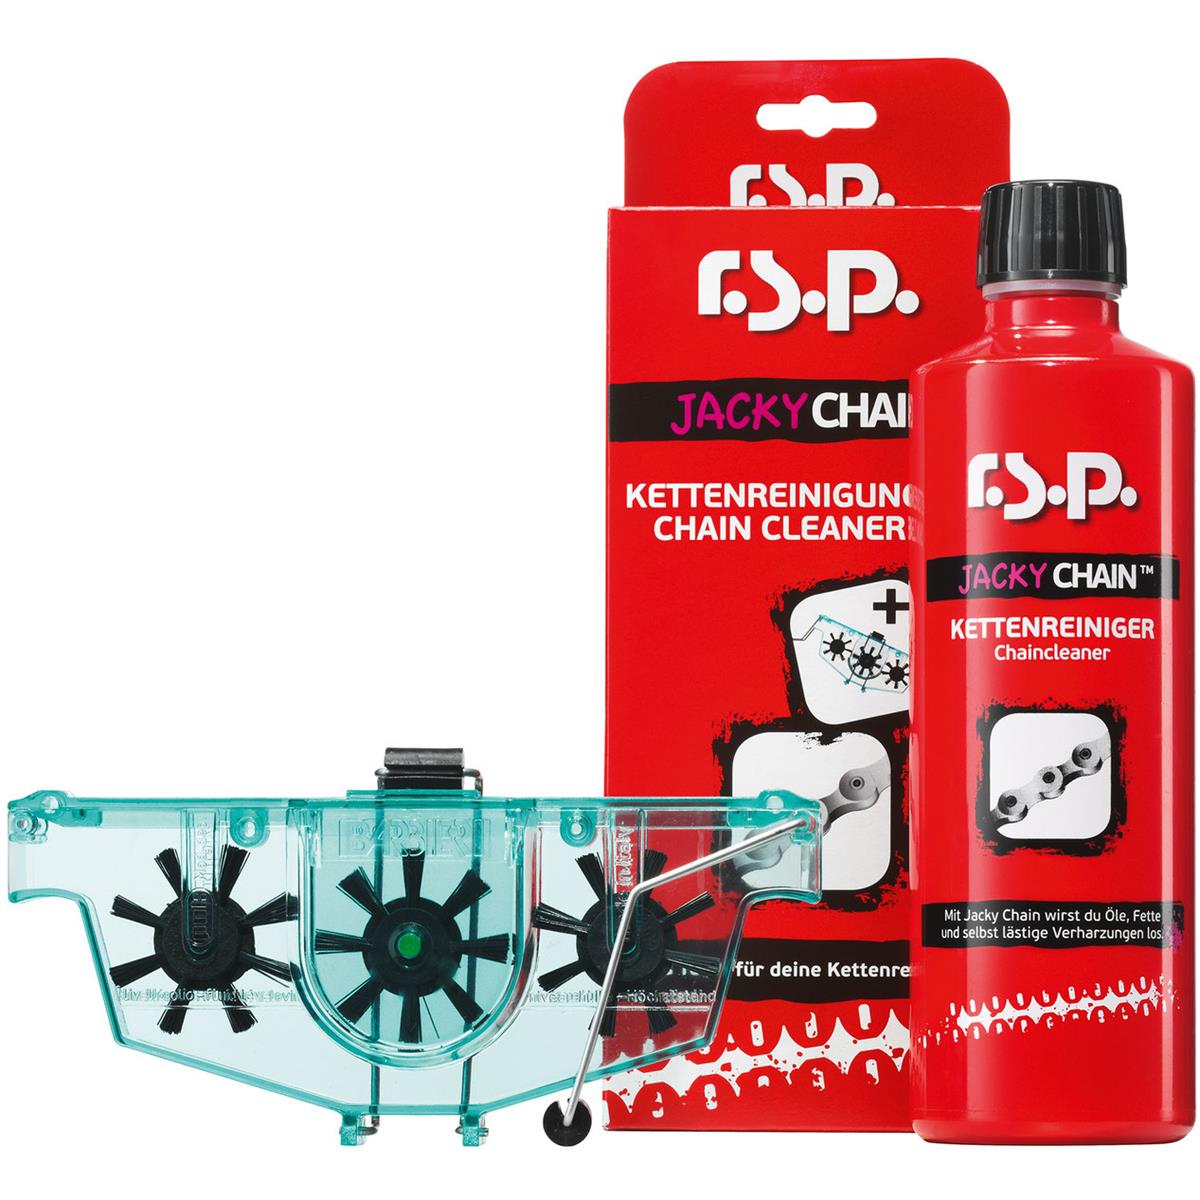 r.s.p. Chain Cleaning Kit Jacky Chain with Chain Cleaning Tool and Chain Cleaner